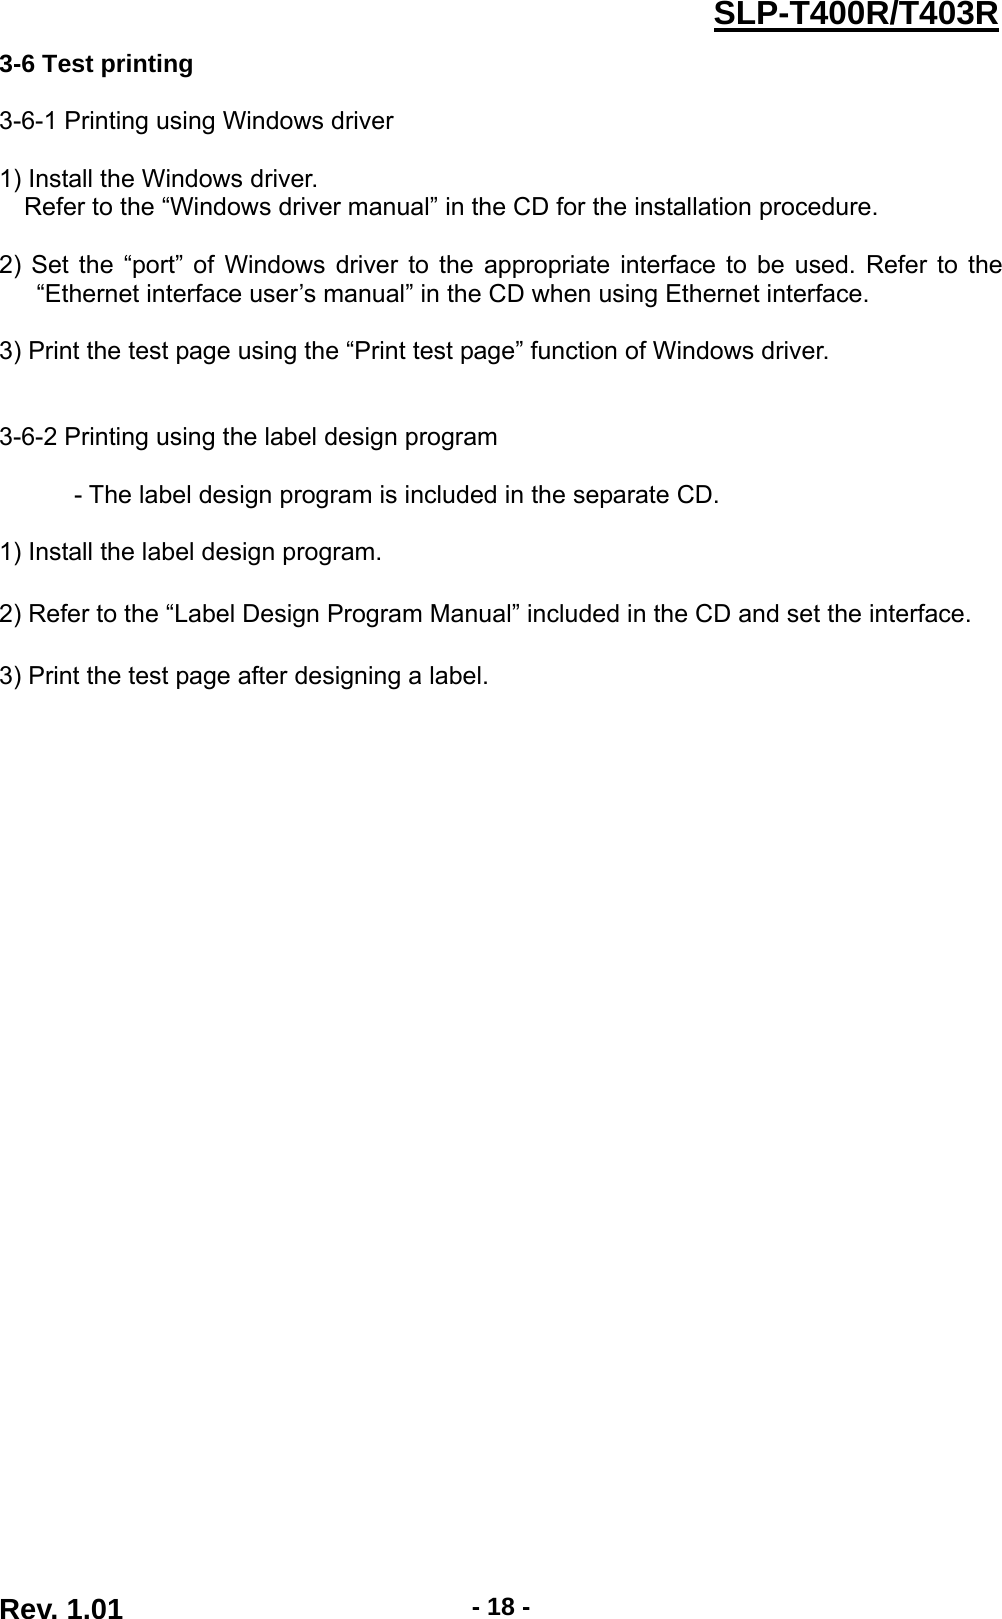  Rev. 1.01  - 18 -SLP-T400R/T403R3-6 Test printing  3-6-1 Printing using Windows driver  1) Install the Windows driver. Refer to the “Windows driver manual” in the CD for the installation procedure.  2) Set the “port” of Windows driver to the appropriate interface to be used. Refer to the “Ethernet interface user’s manual” in the CD when using Ethernet interface.  3) Print the test page using the “Print test page” function of Windows driver.     3-6-2 Printing using the label design program              - The label design program is included in the separate CD.  1) Install the label design program.  2) Refer to the “Label Design Program Manual” included in the CD and set the interface.  3) Print the test page after designing a label. 